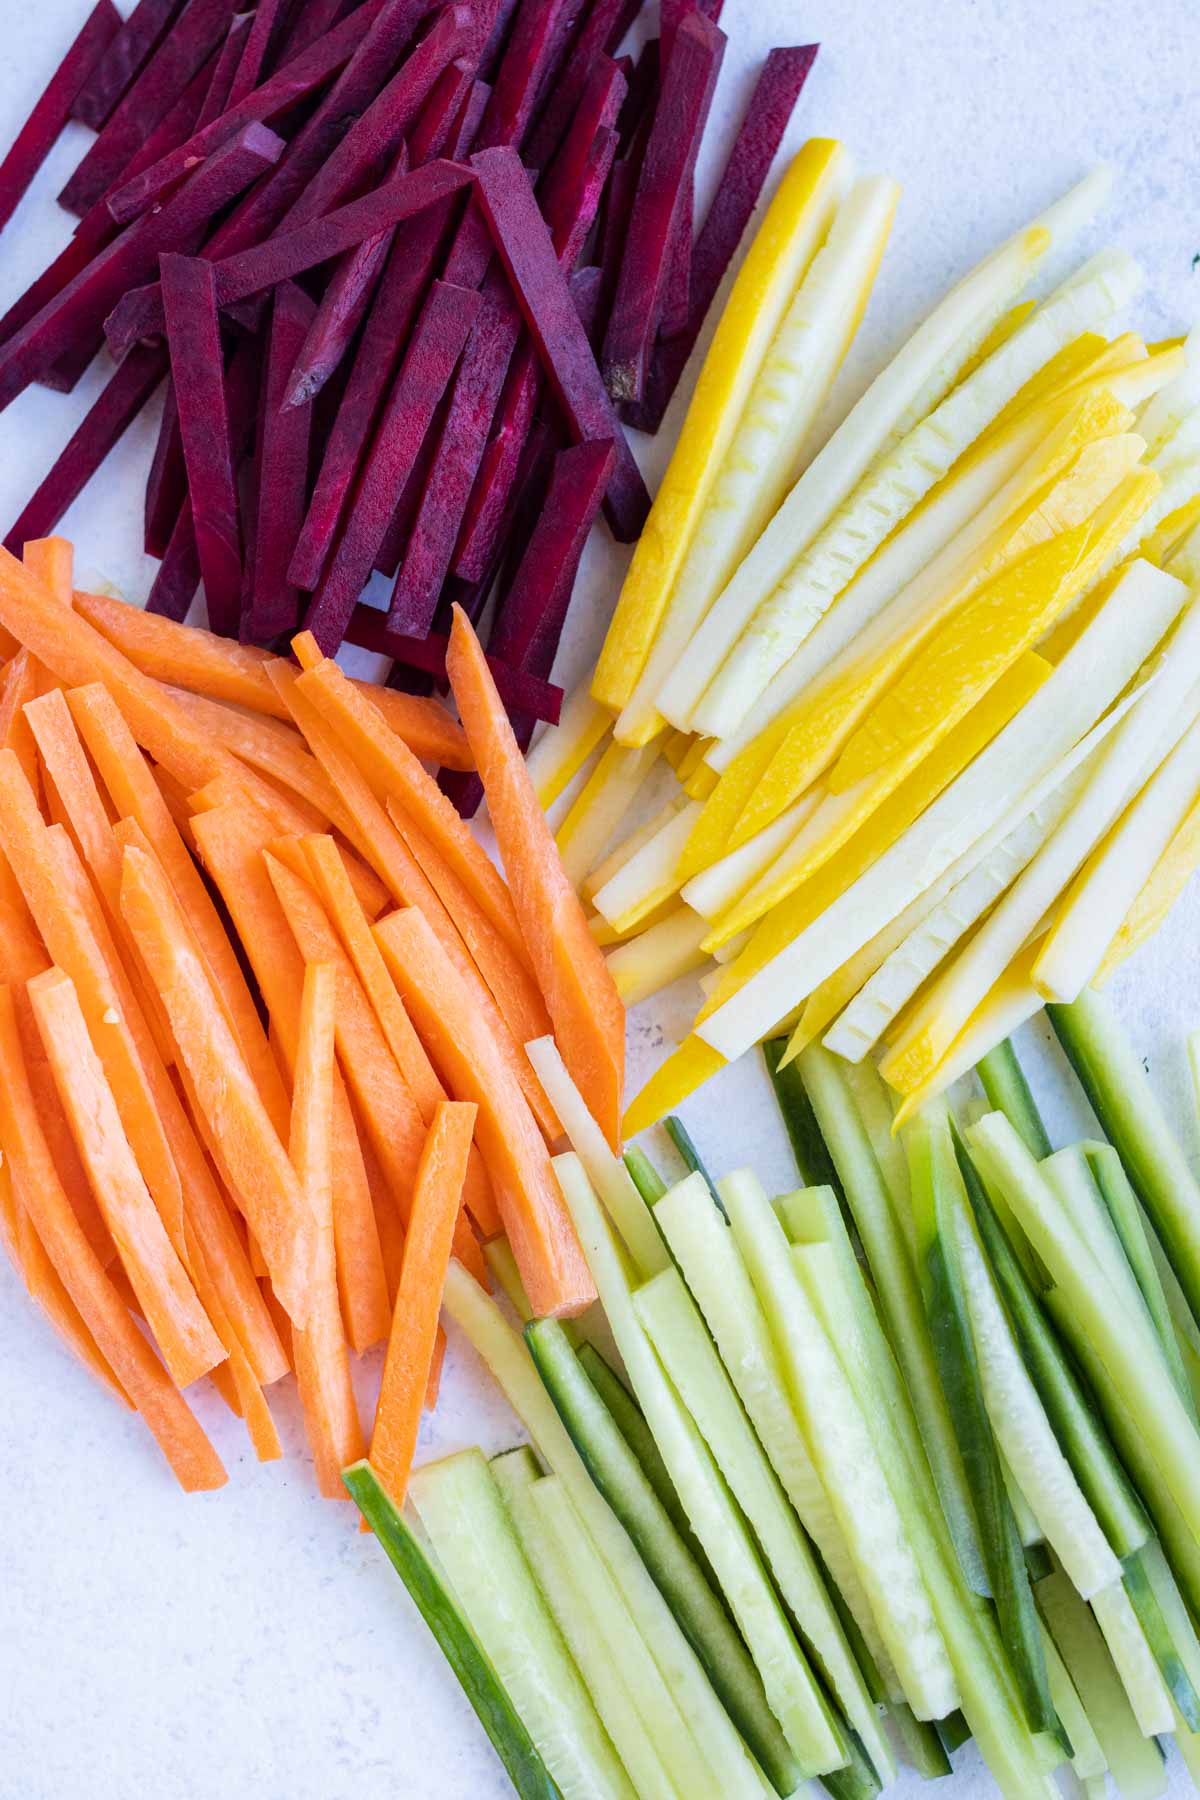 All of the Julienne cut vegetables are shown on the counter next to each other.